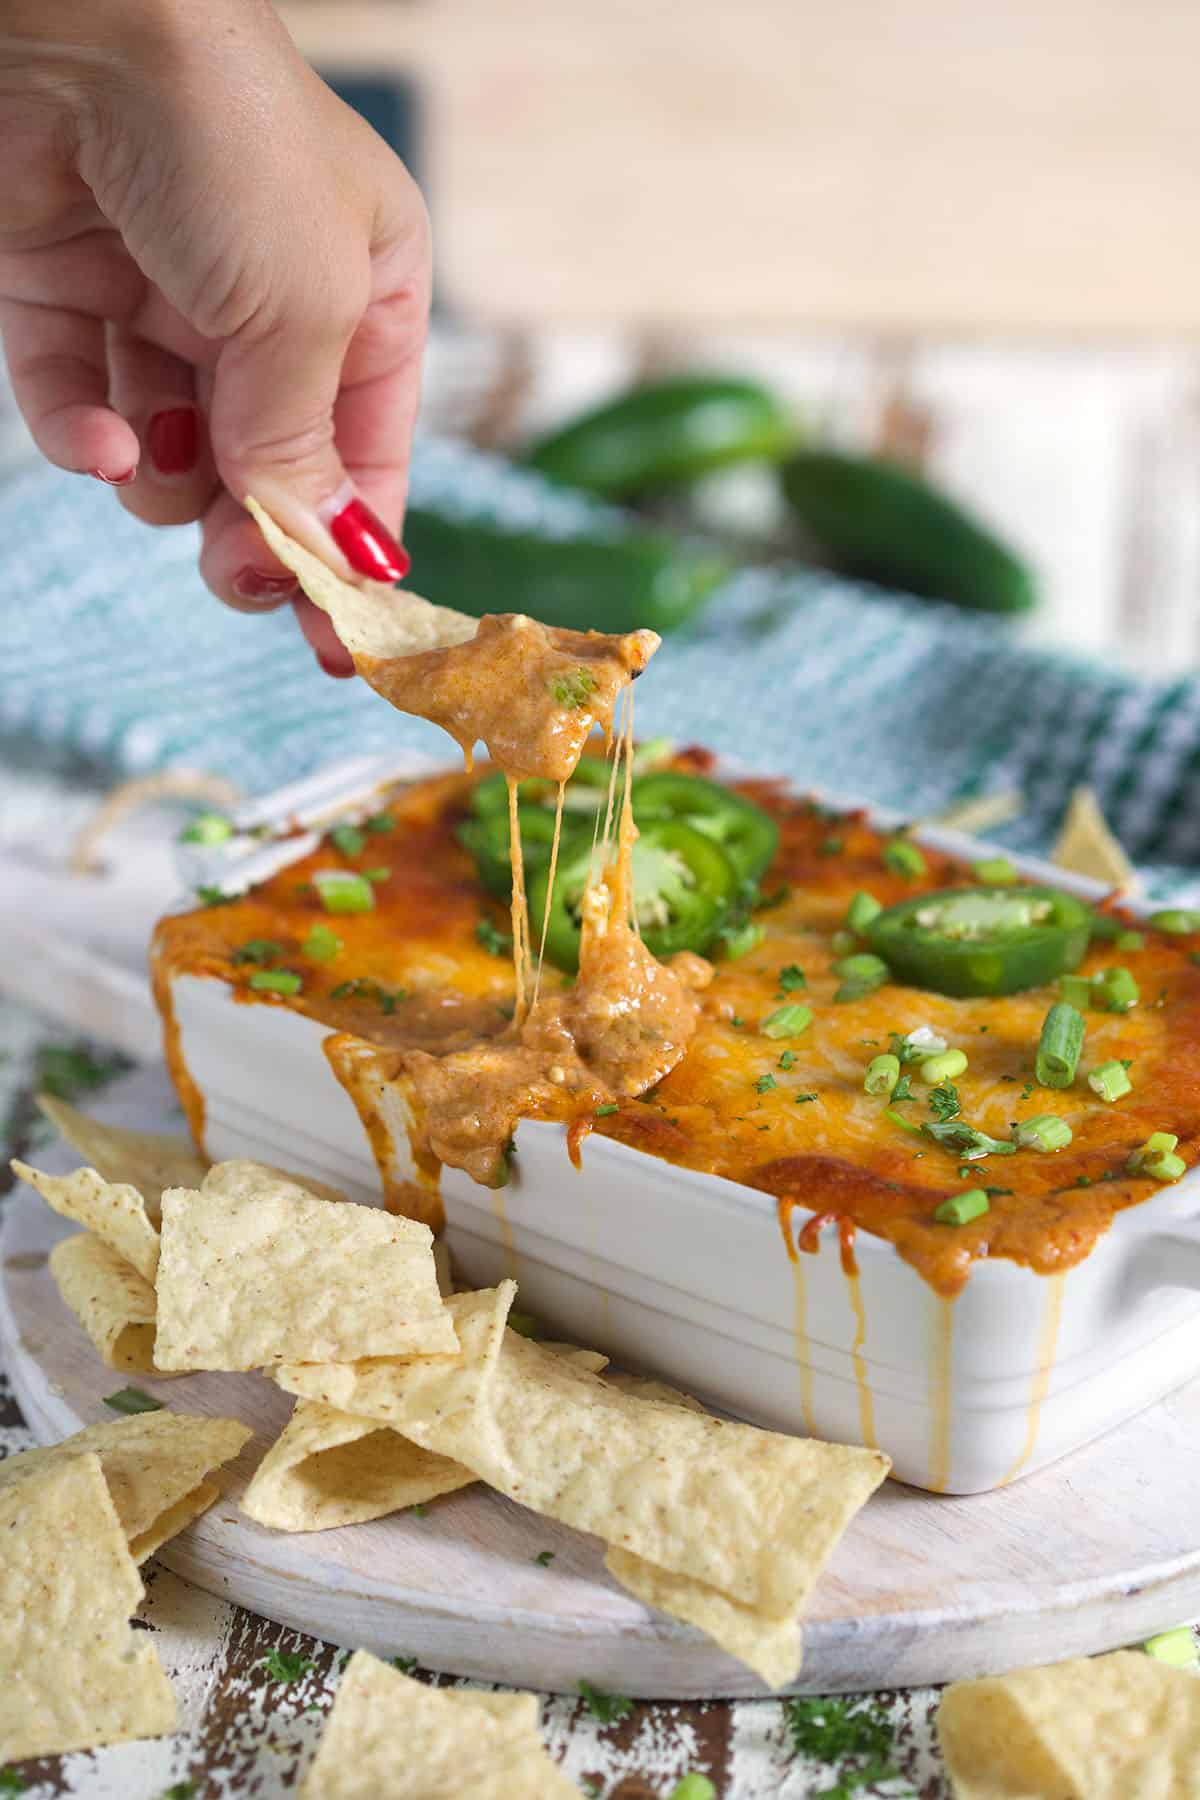 Chili Cheese Dip in a white baking dish with tortilla chips on the side and a hand holding a chip with a cheese pull to the dip.